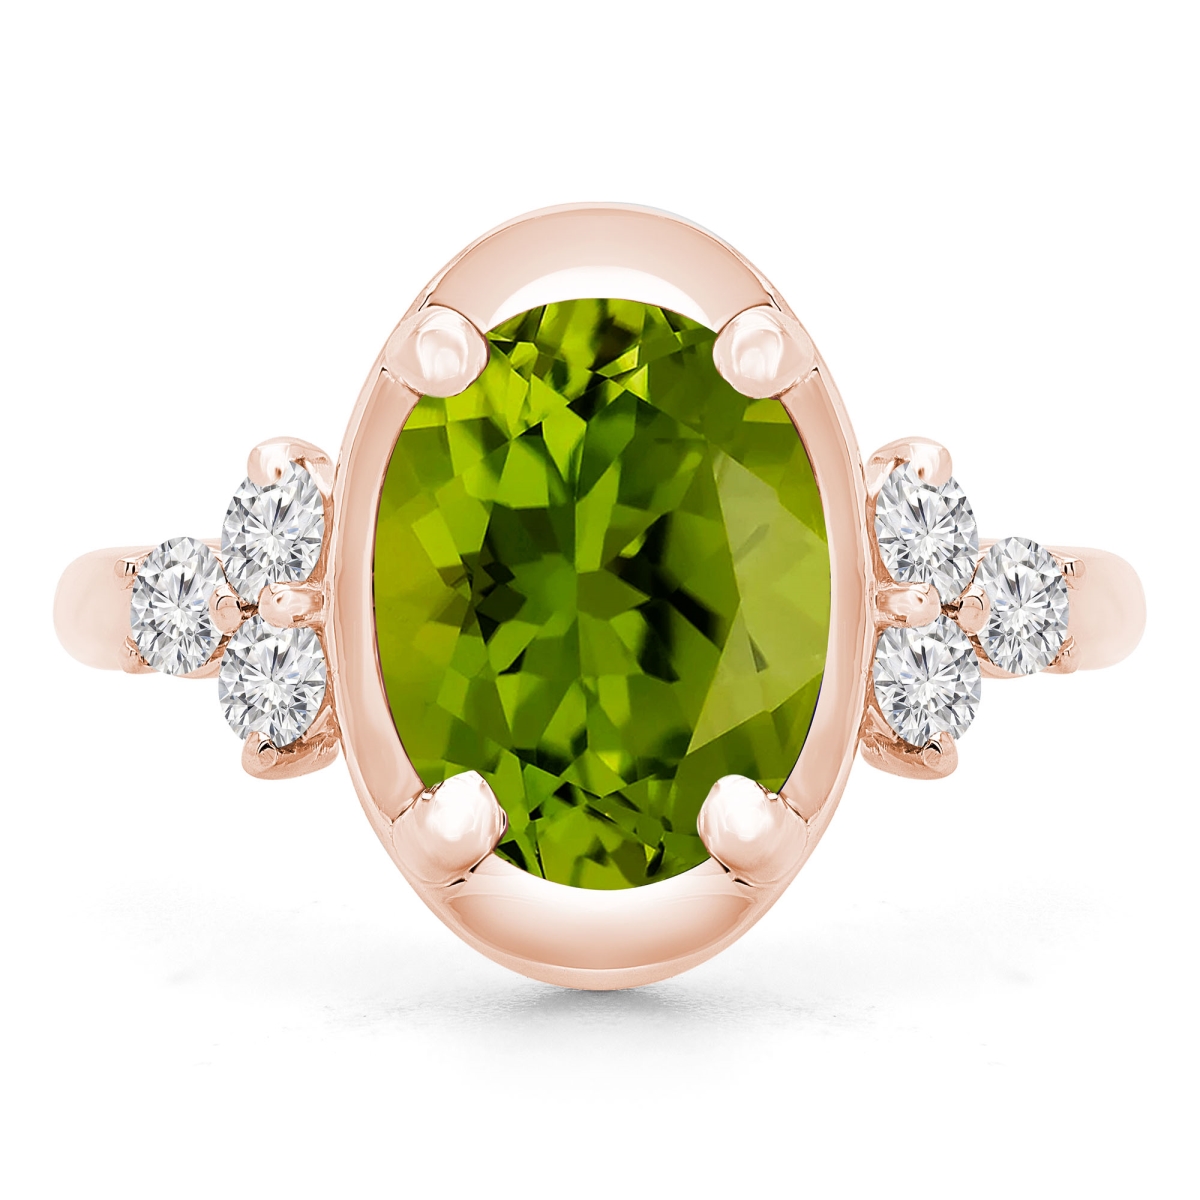 Picture of Majesty Diamonds MD190412-3.75 3.9 CTW Oval Green Peridot Cocktail Ring in 14K Rose Gold - Size 3.75